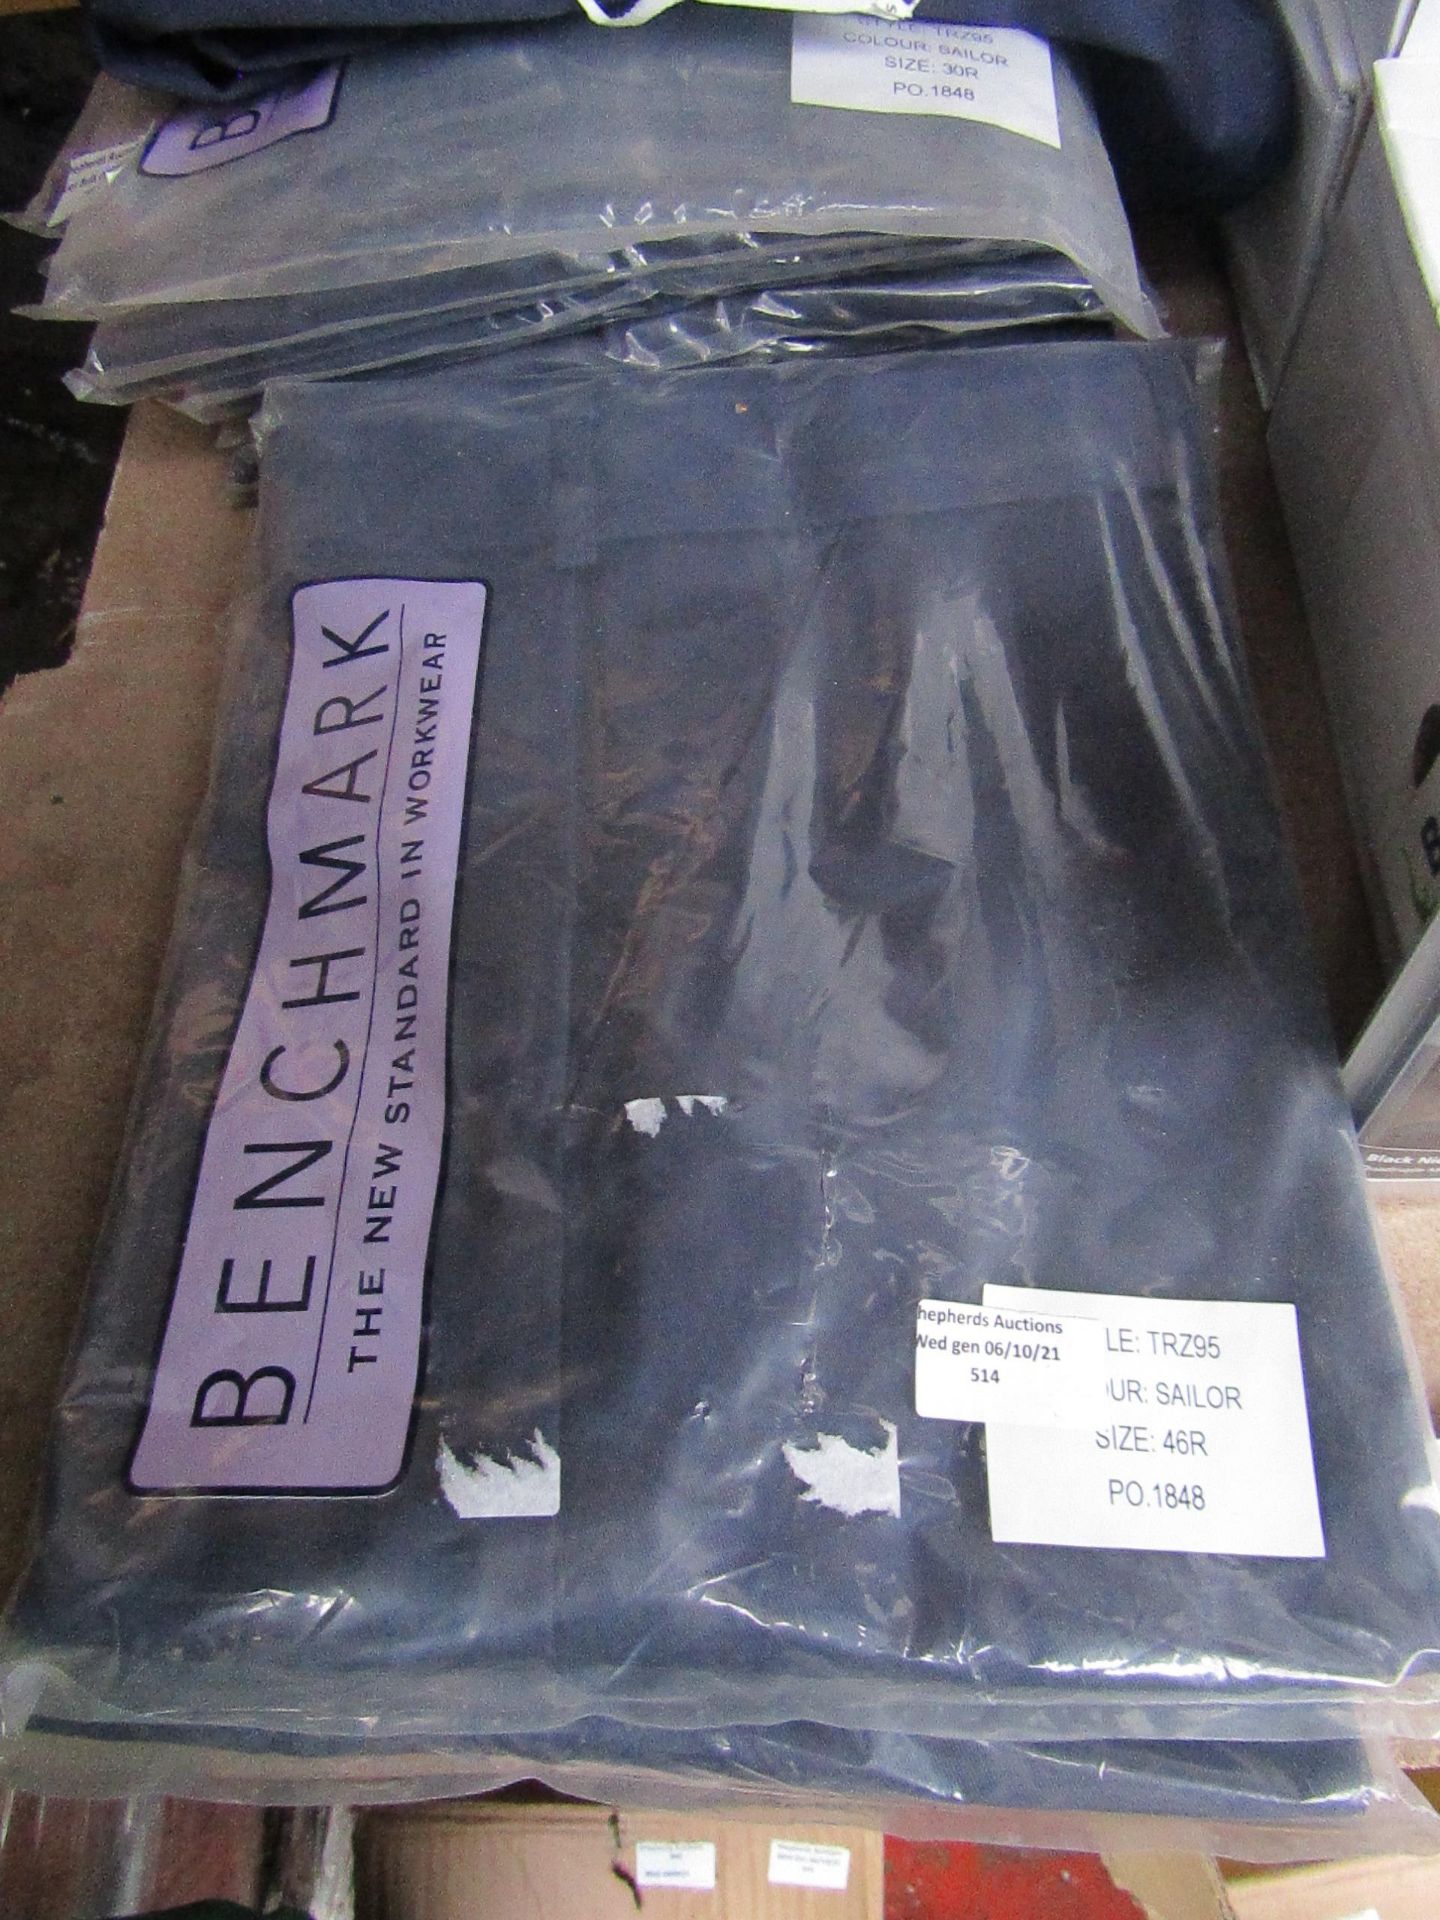 2x Benchmark - Sailor Blue Work Trousers - Size 46R - Unused & Packaged.